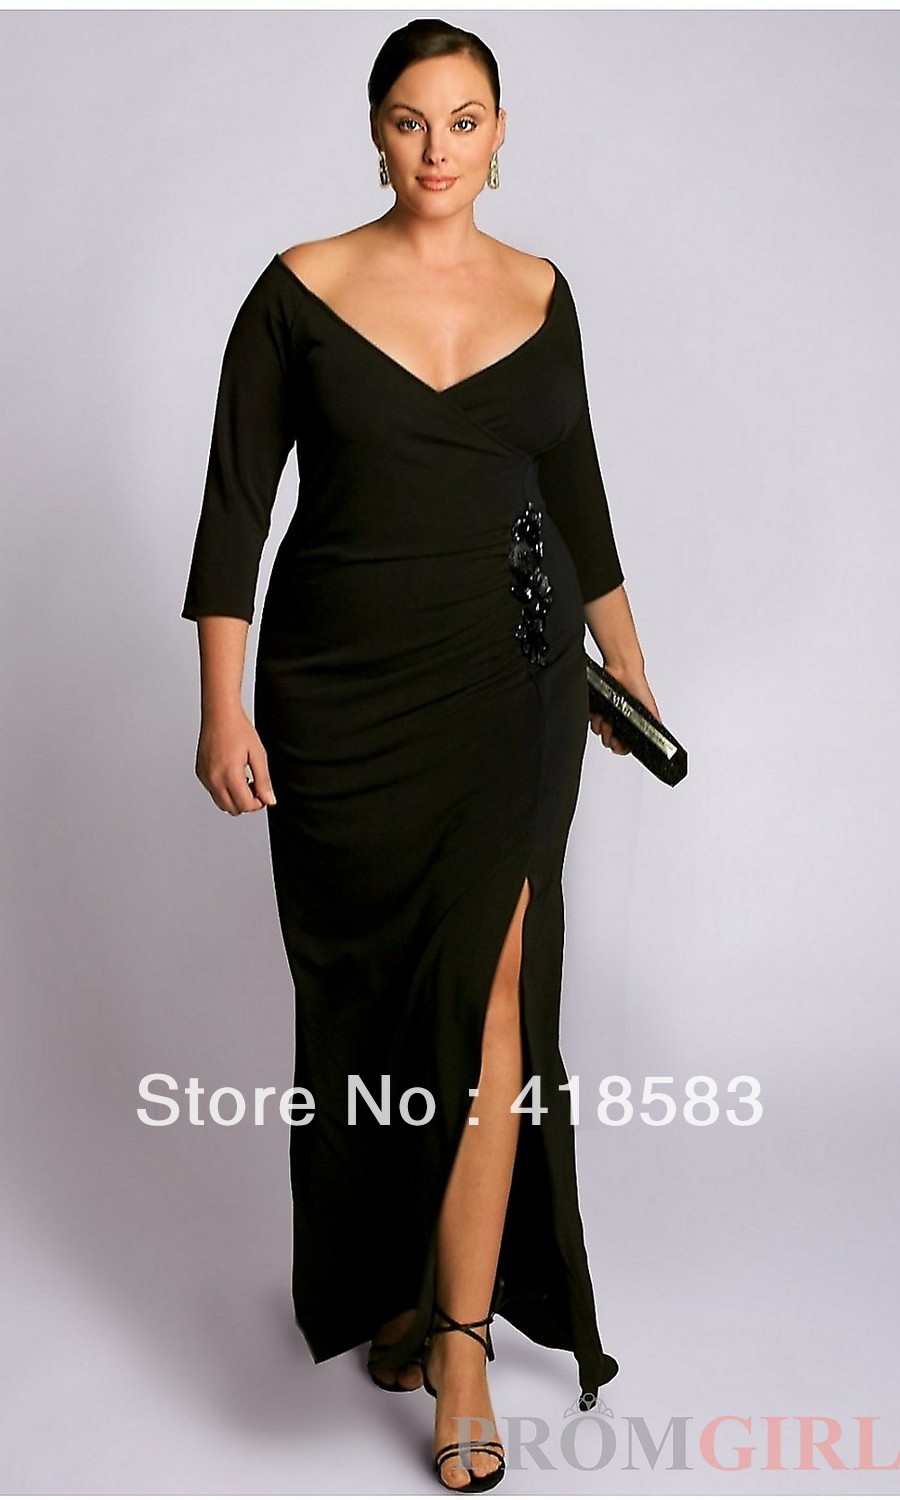 Hot Selling Sexy 3/4 Sleeves Sheath/Column Ankle length Party Dresses V Neck Elastic Satin Celebrity Dresses Plus Size